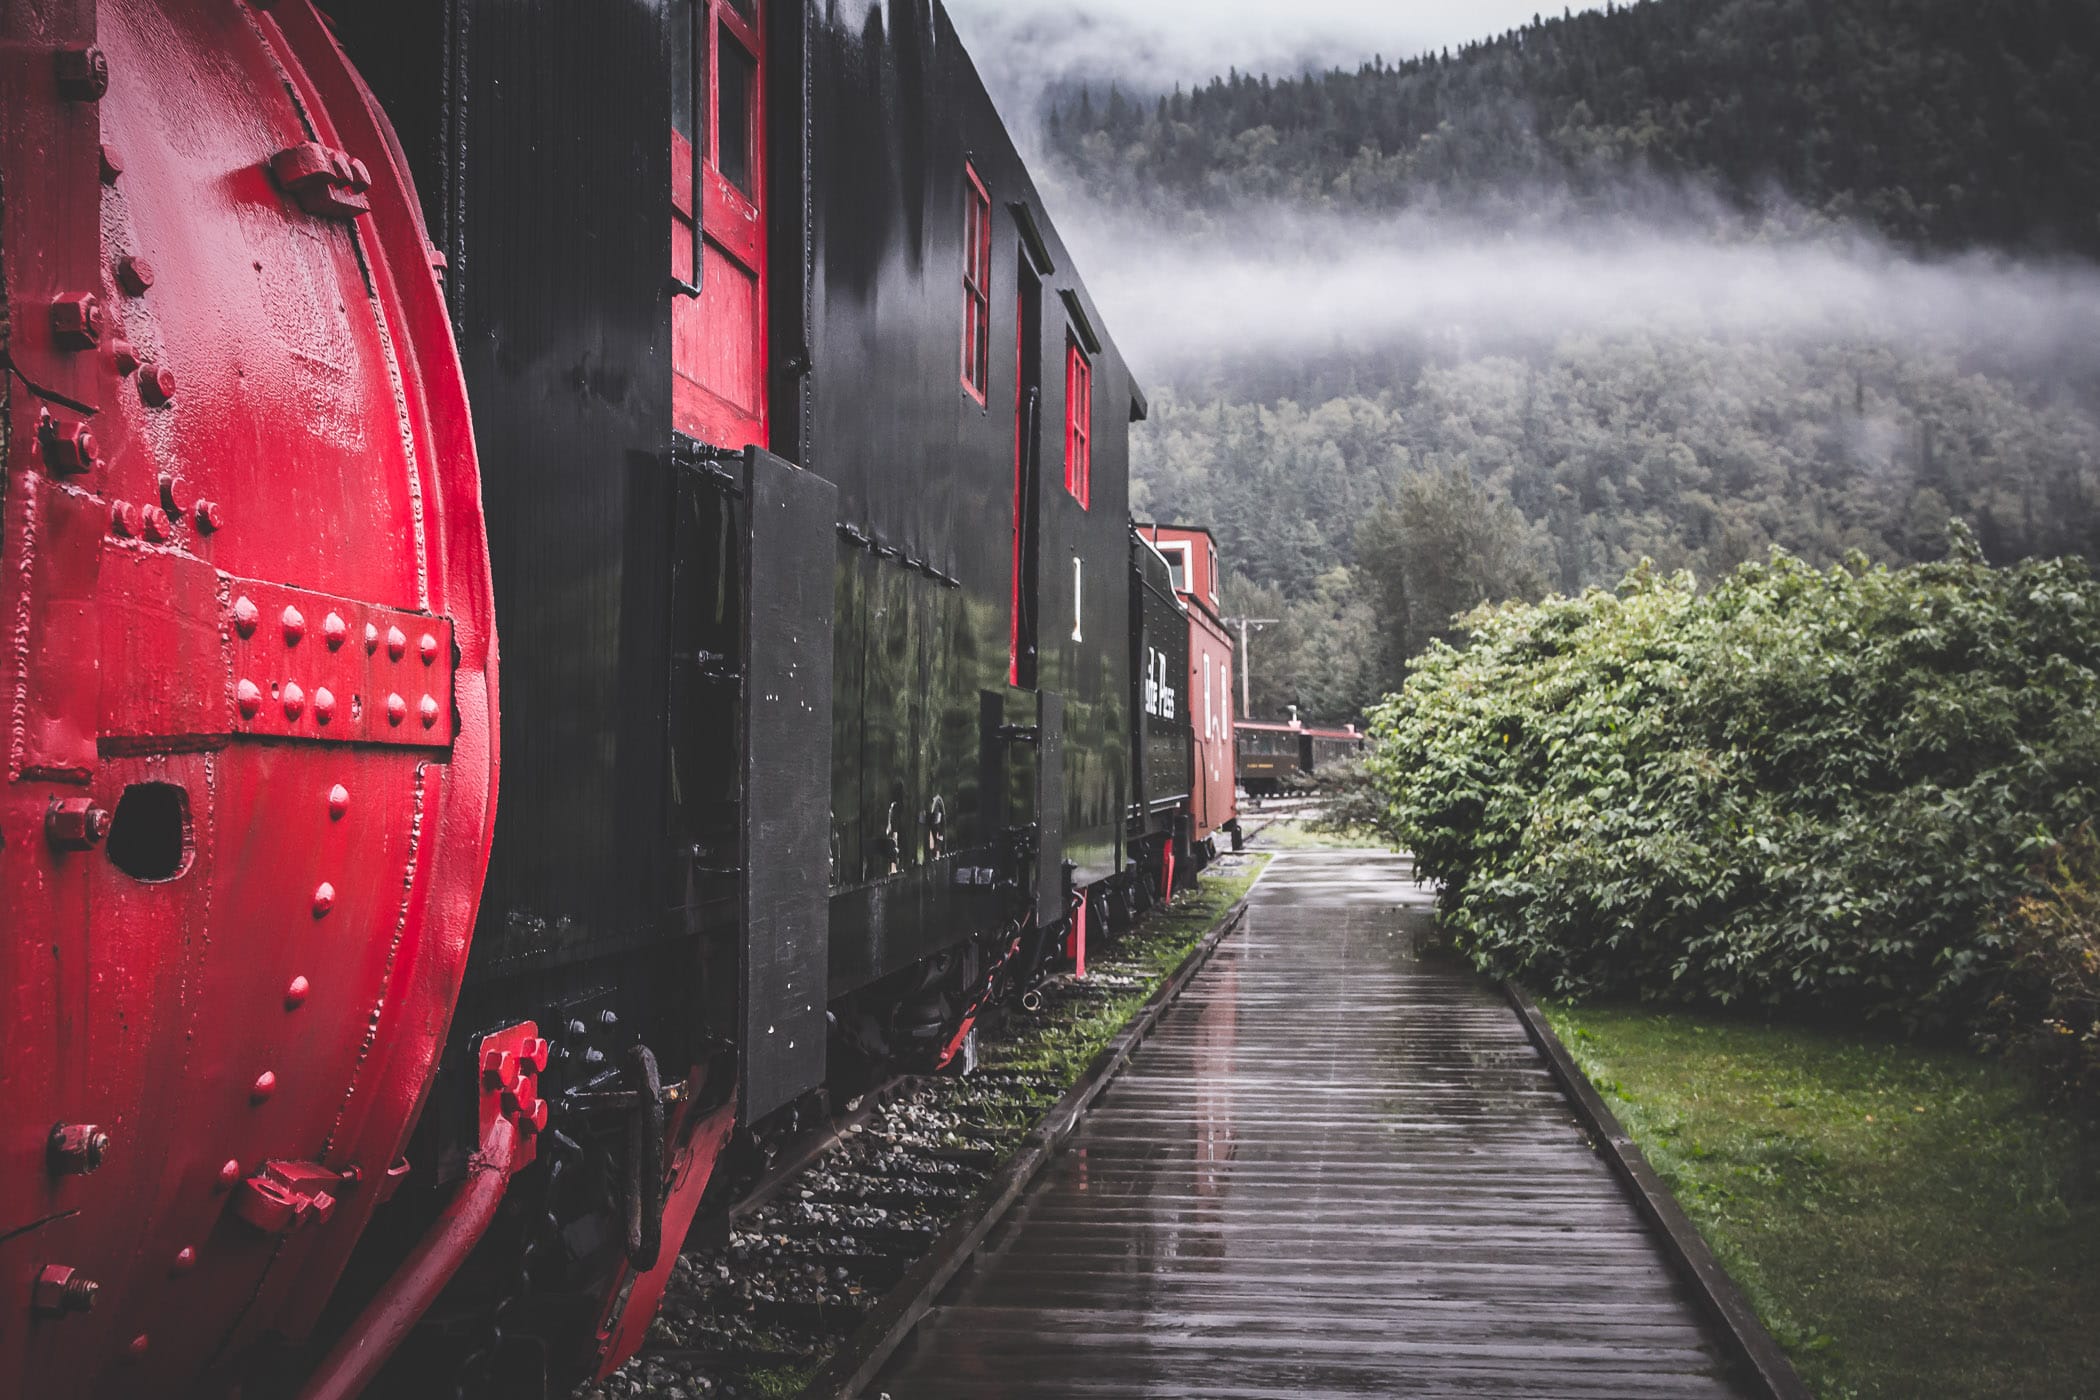 Railcars of the White Pass & Yukon Route Railway on a wet, misty morning in Skagway, Alaska.